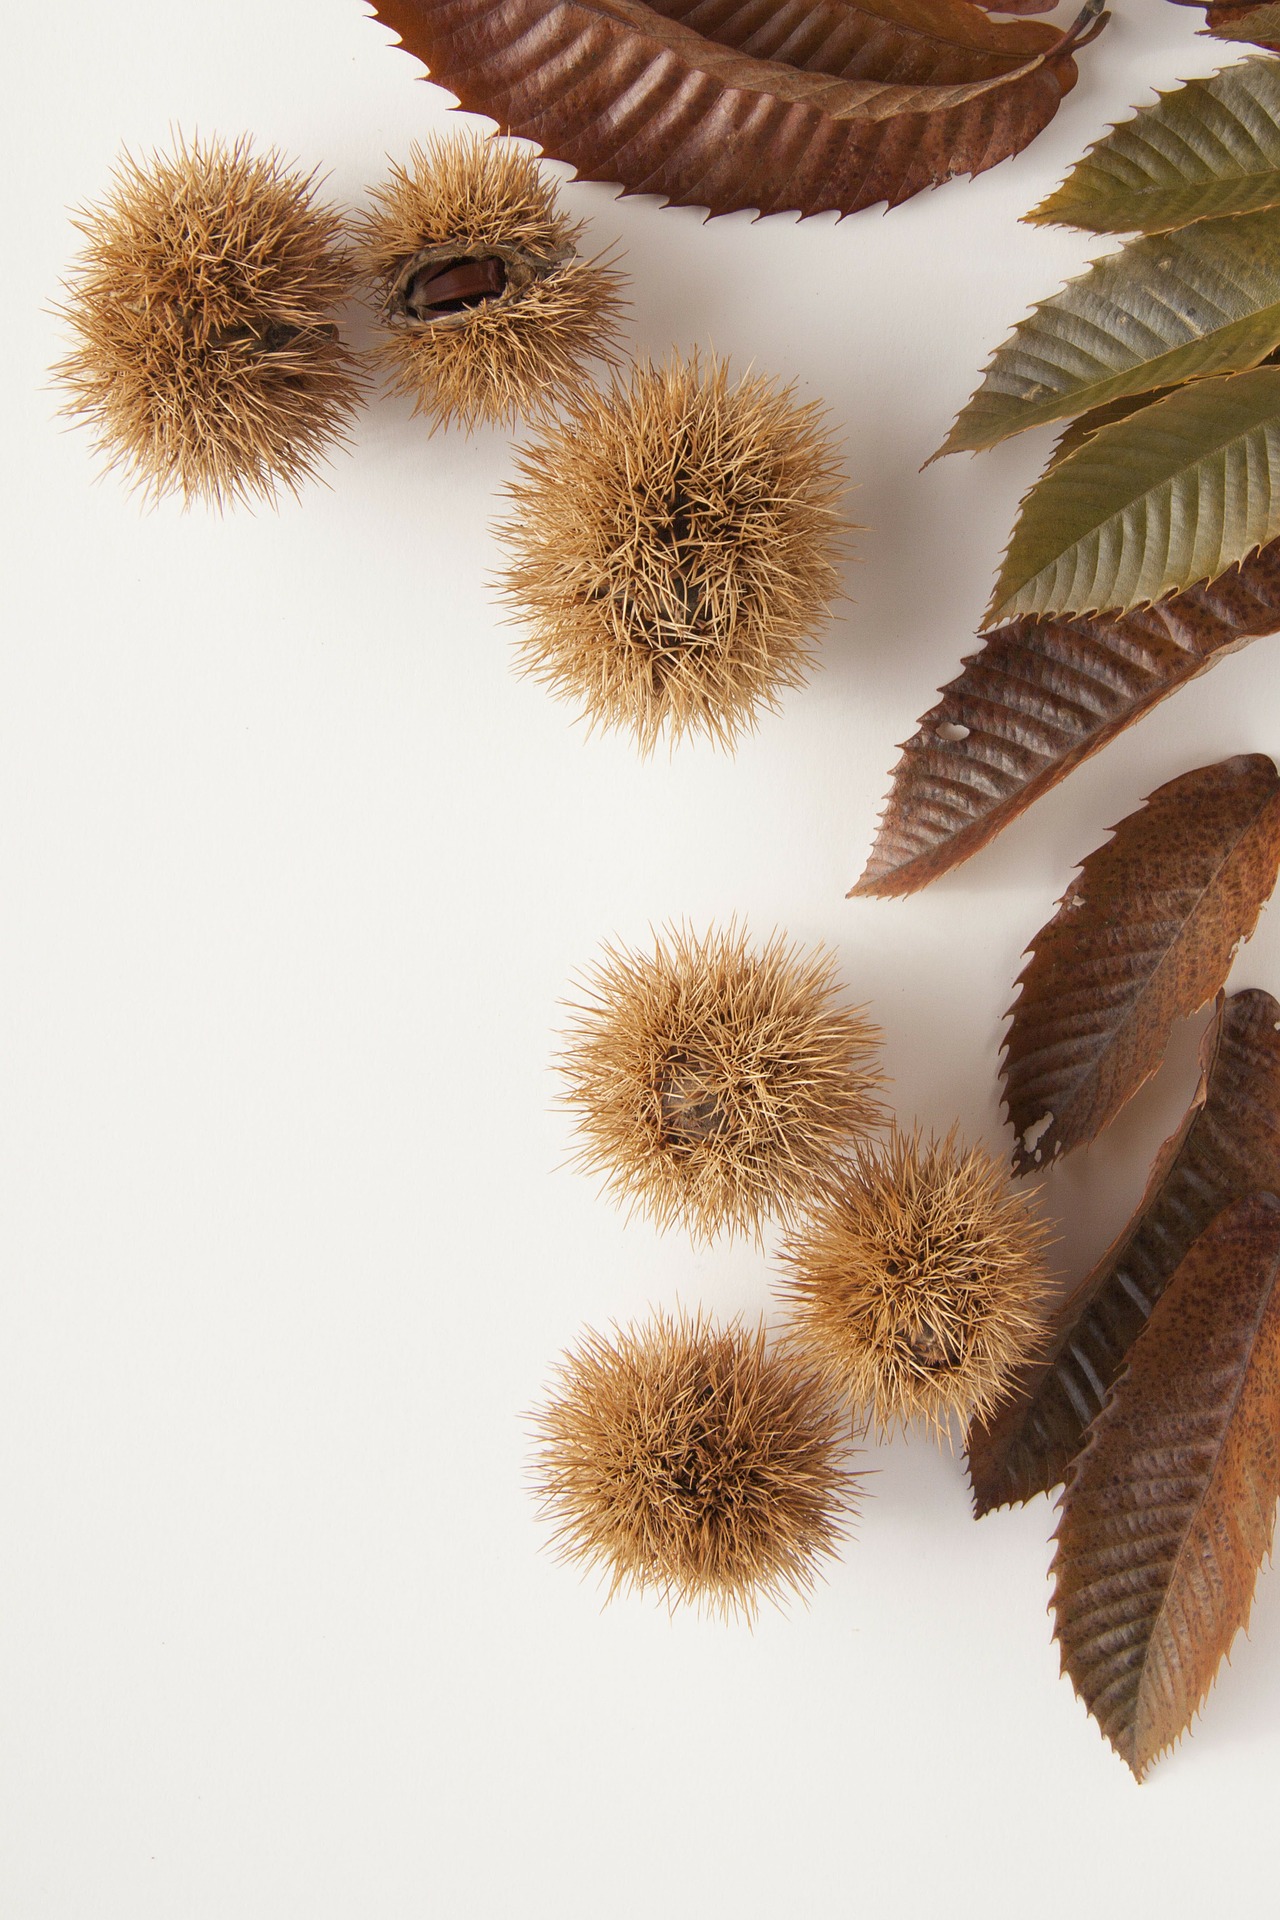 Sweet chestnuts photo